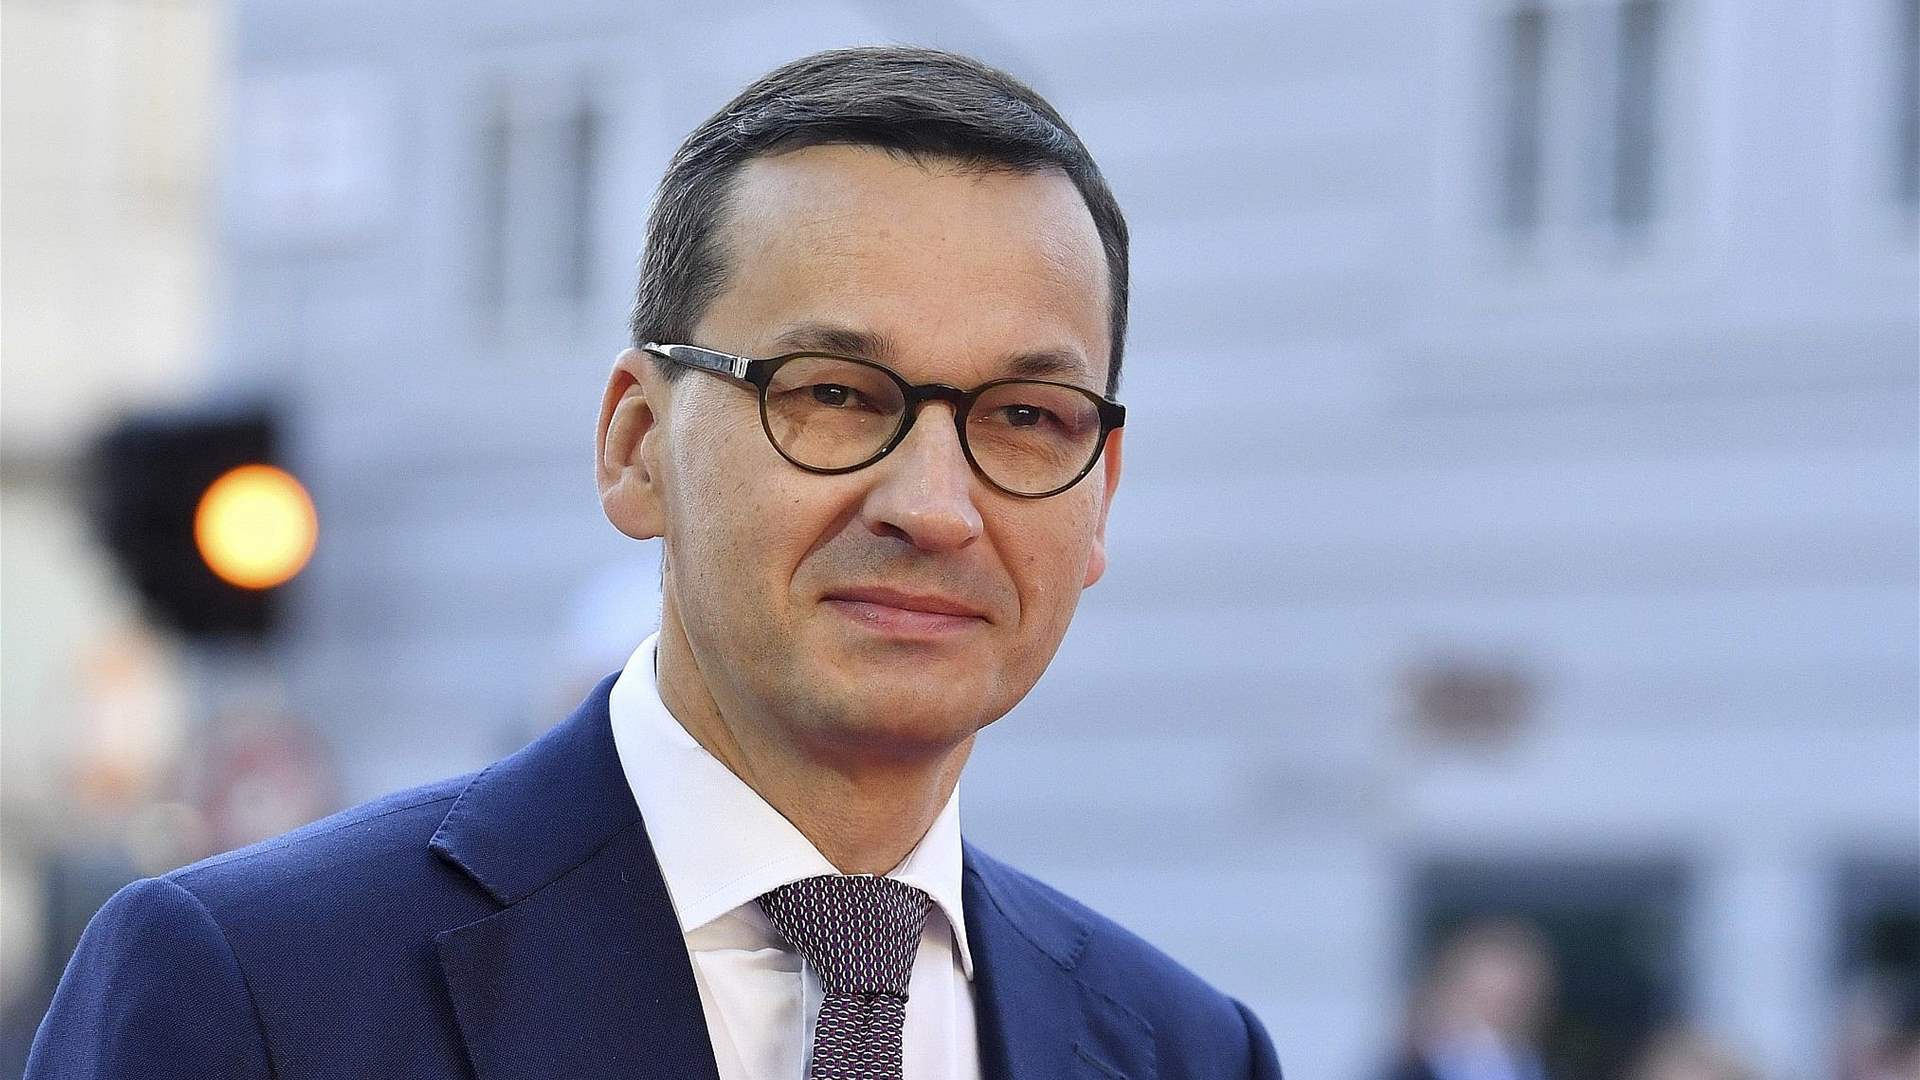 Germany will become &#39;leader&#39; in European security: Polish PM